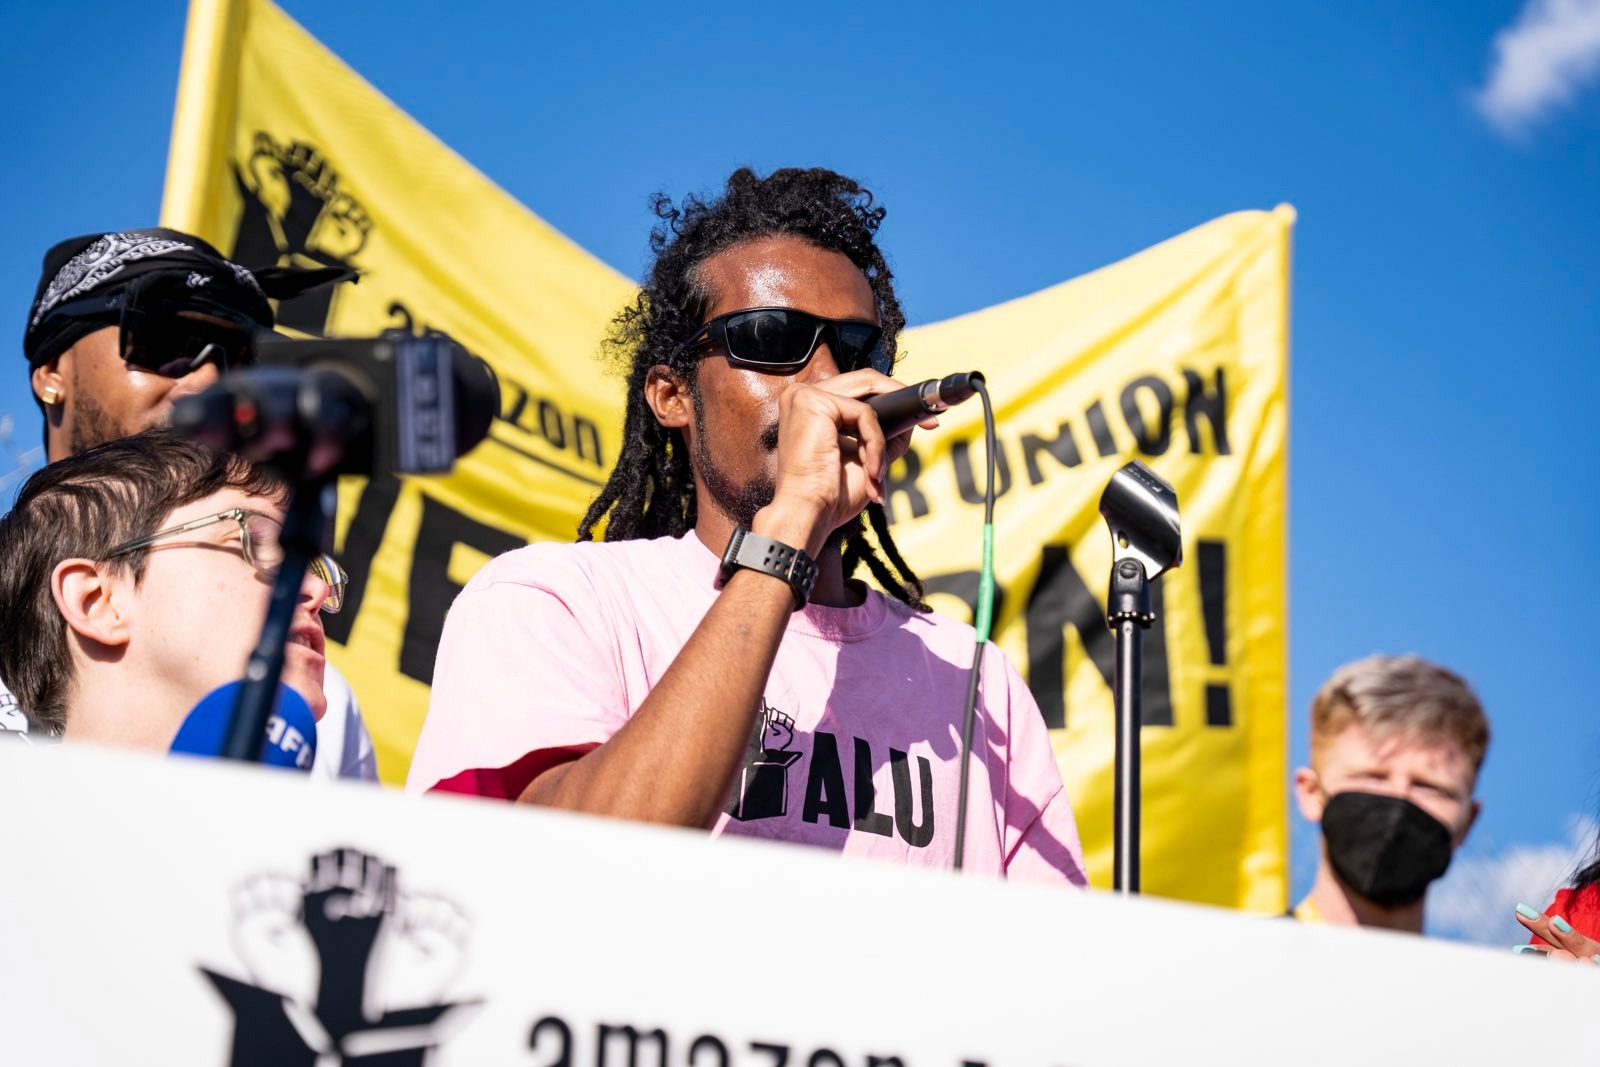 Fired Amazon worker Tristan speaking with Chris smalls and other ALU organizers